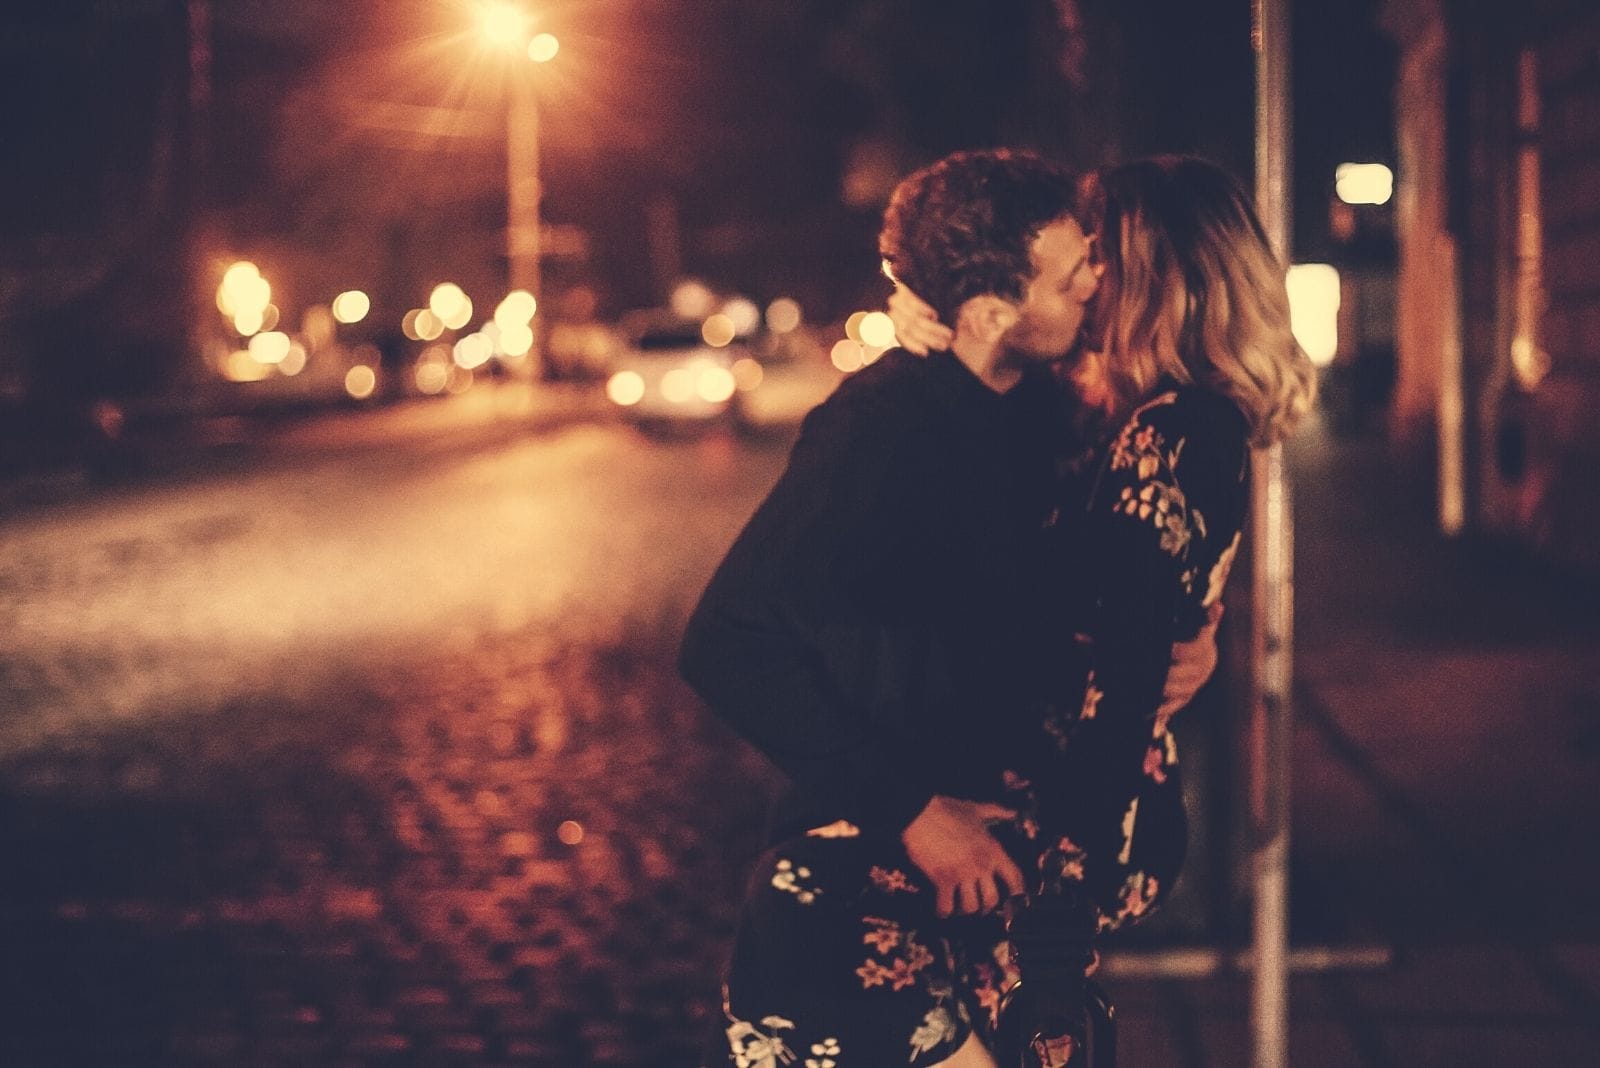 passionate lovers kissing near the street light during the night in the street